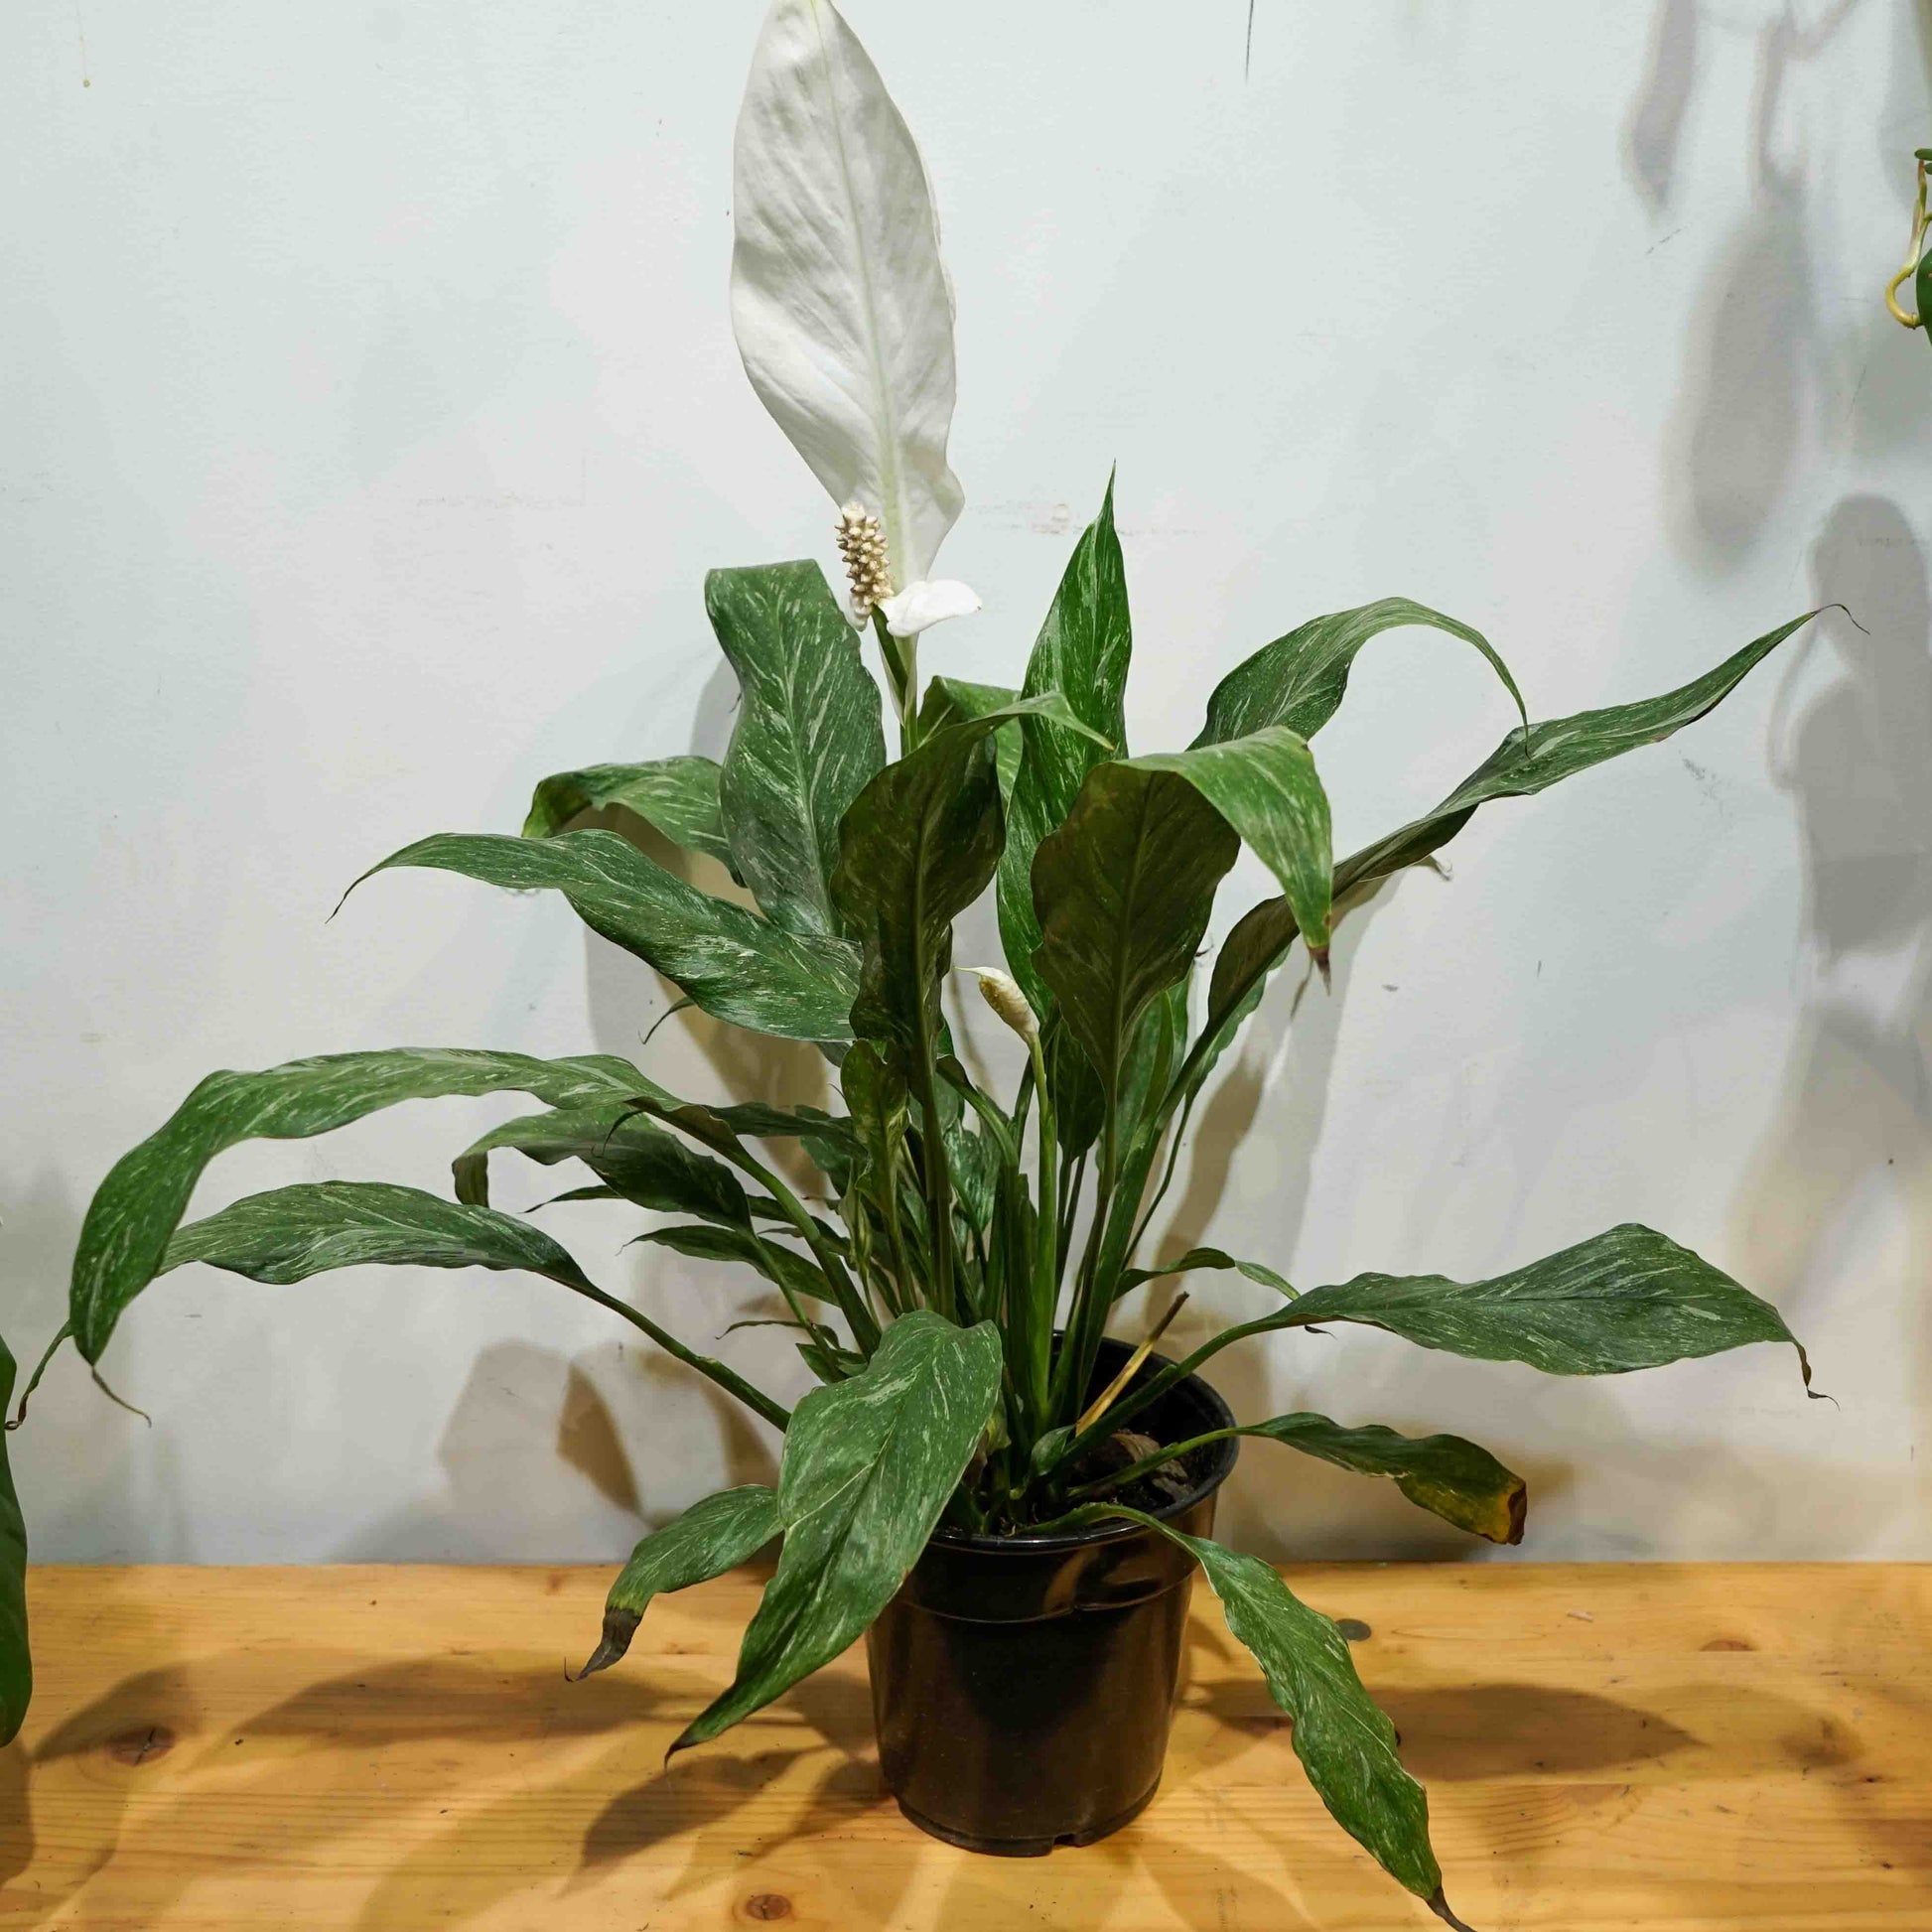 Variegated Peace Lily (Spathiphyllum) in a 6 inch pot. Indoor plant for sale by Promise Supply for delivery and pickup in Toronto